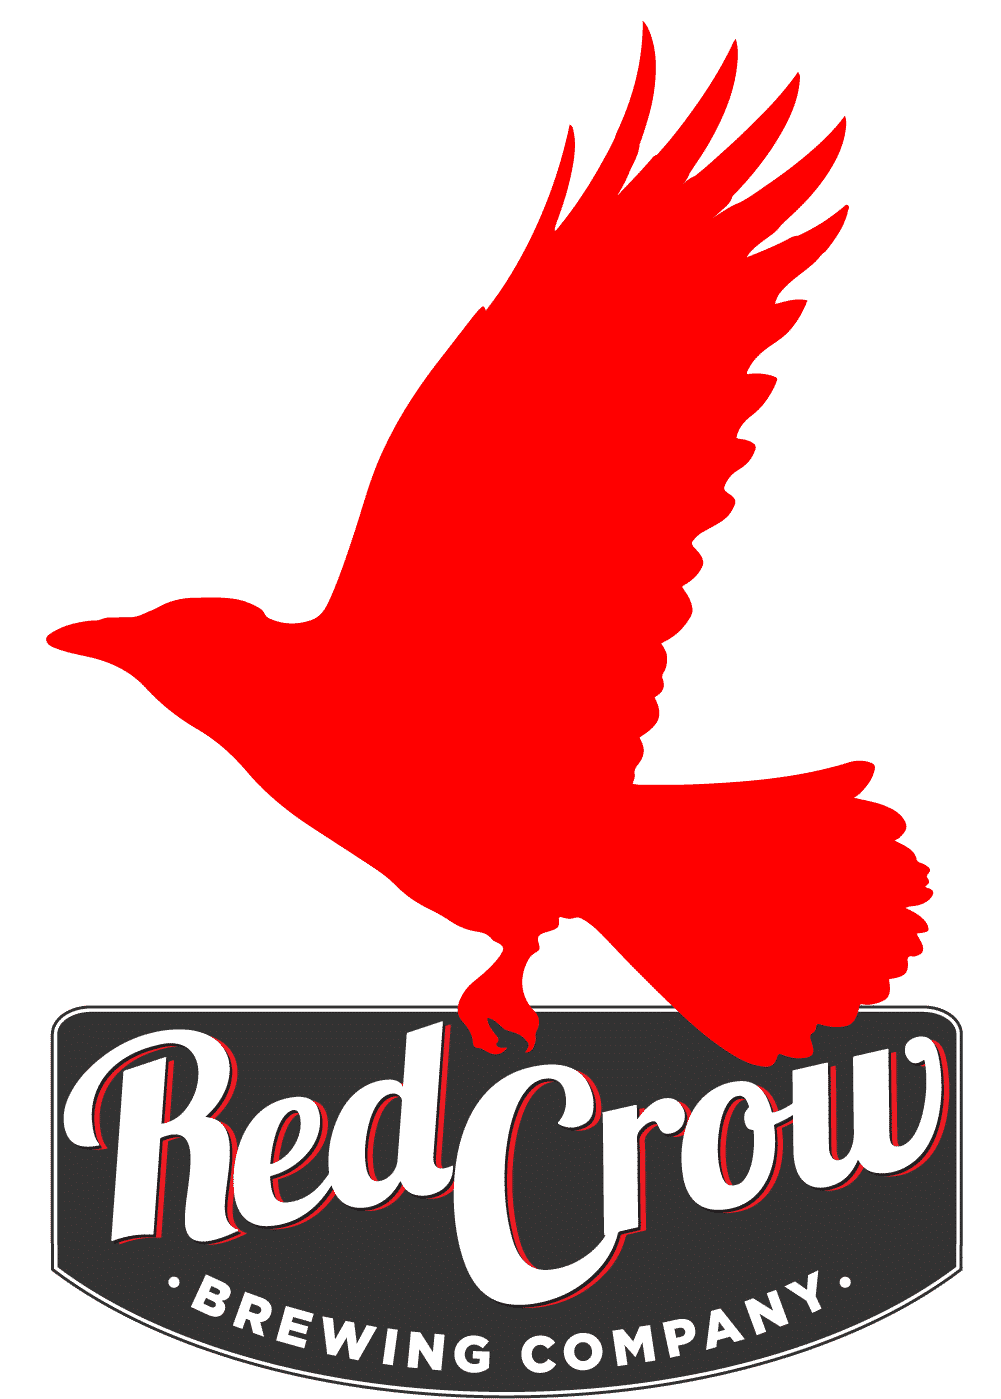 Red Crow Brewing Company